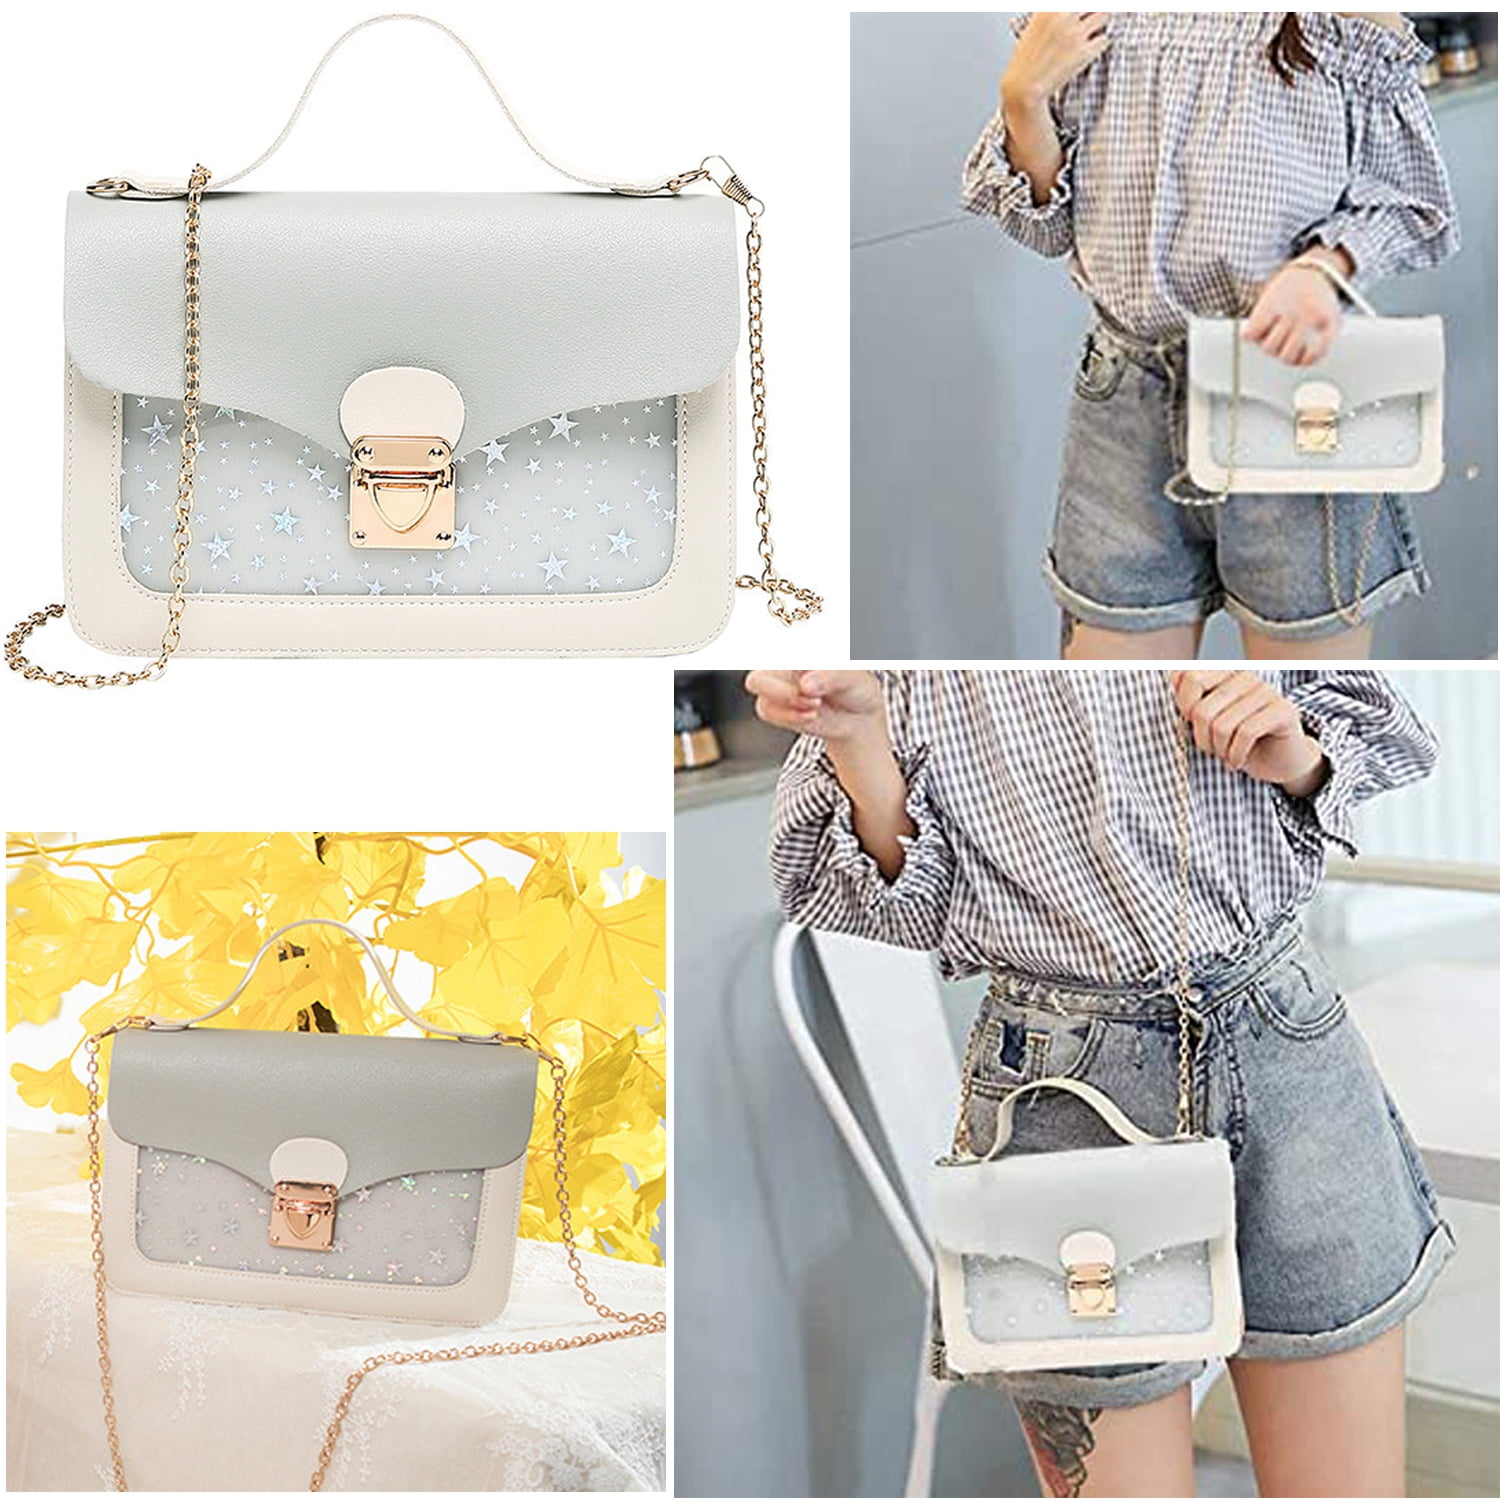 Quilted Small Leather Bag Chains Crossbody Mobile Phone Bags Mini Purses  And Primark Handbags For Women Messenger Satchels Pocket Shoulder From  Gavingg, $26.38 | DHgate.Com